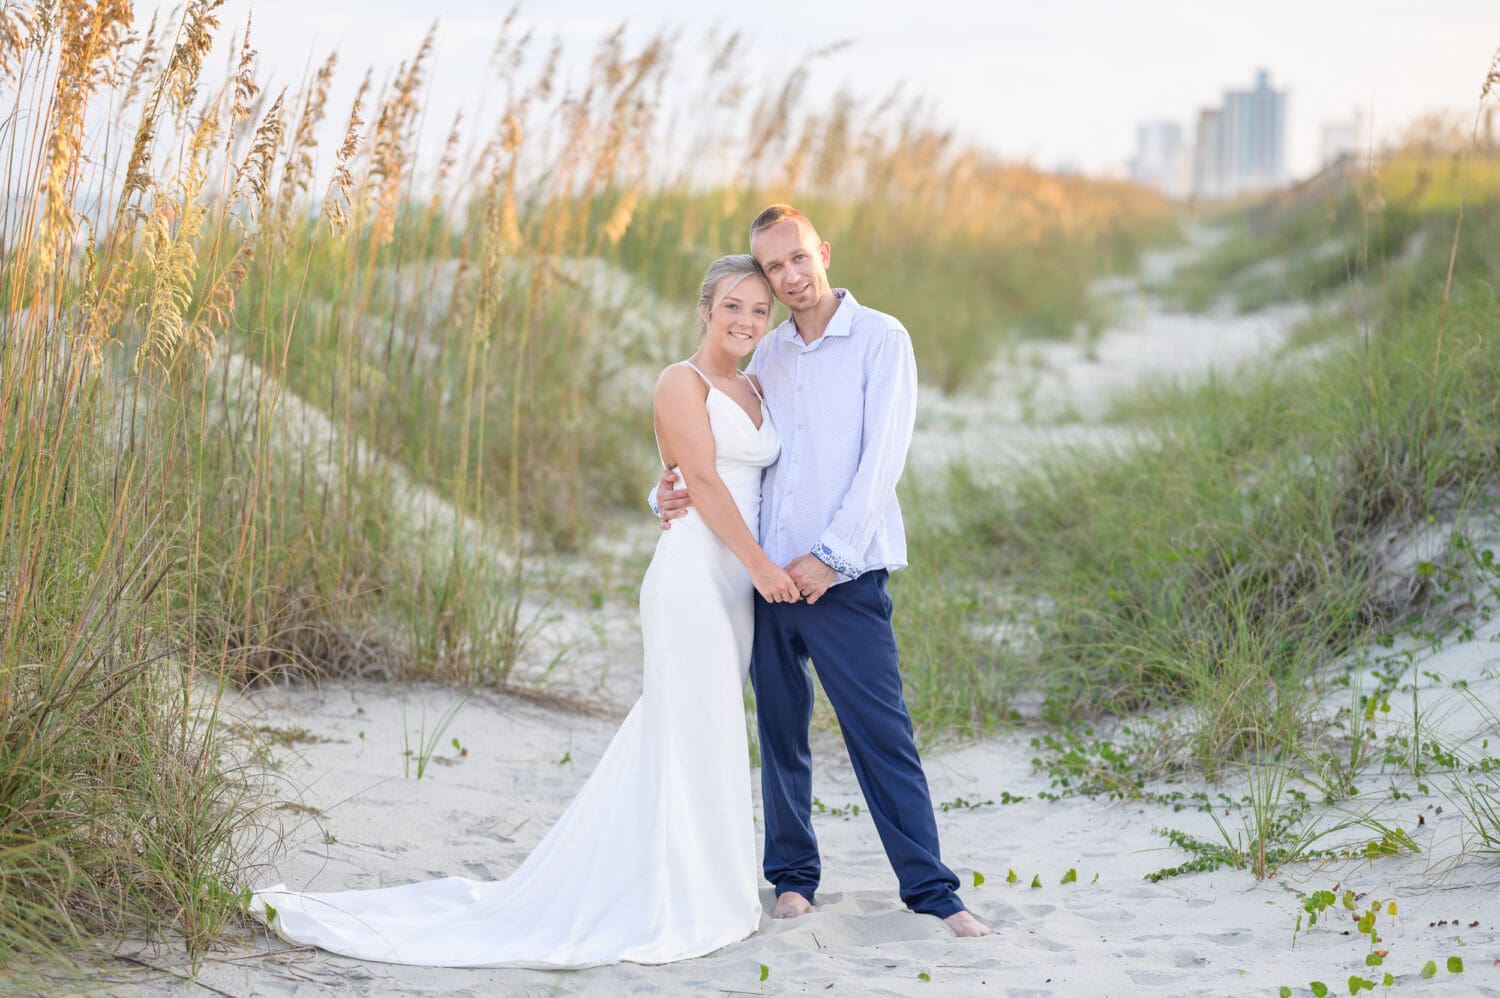 Bride and groom after an intimate wedding by the dunes - Myrtle Beach